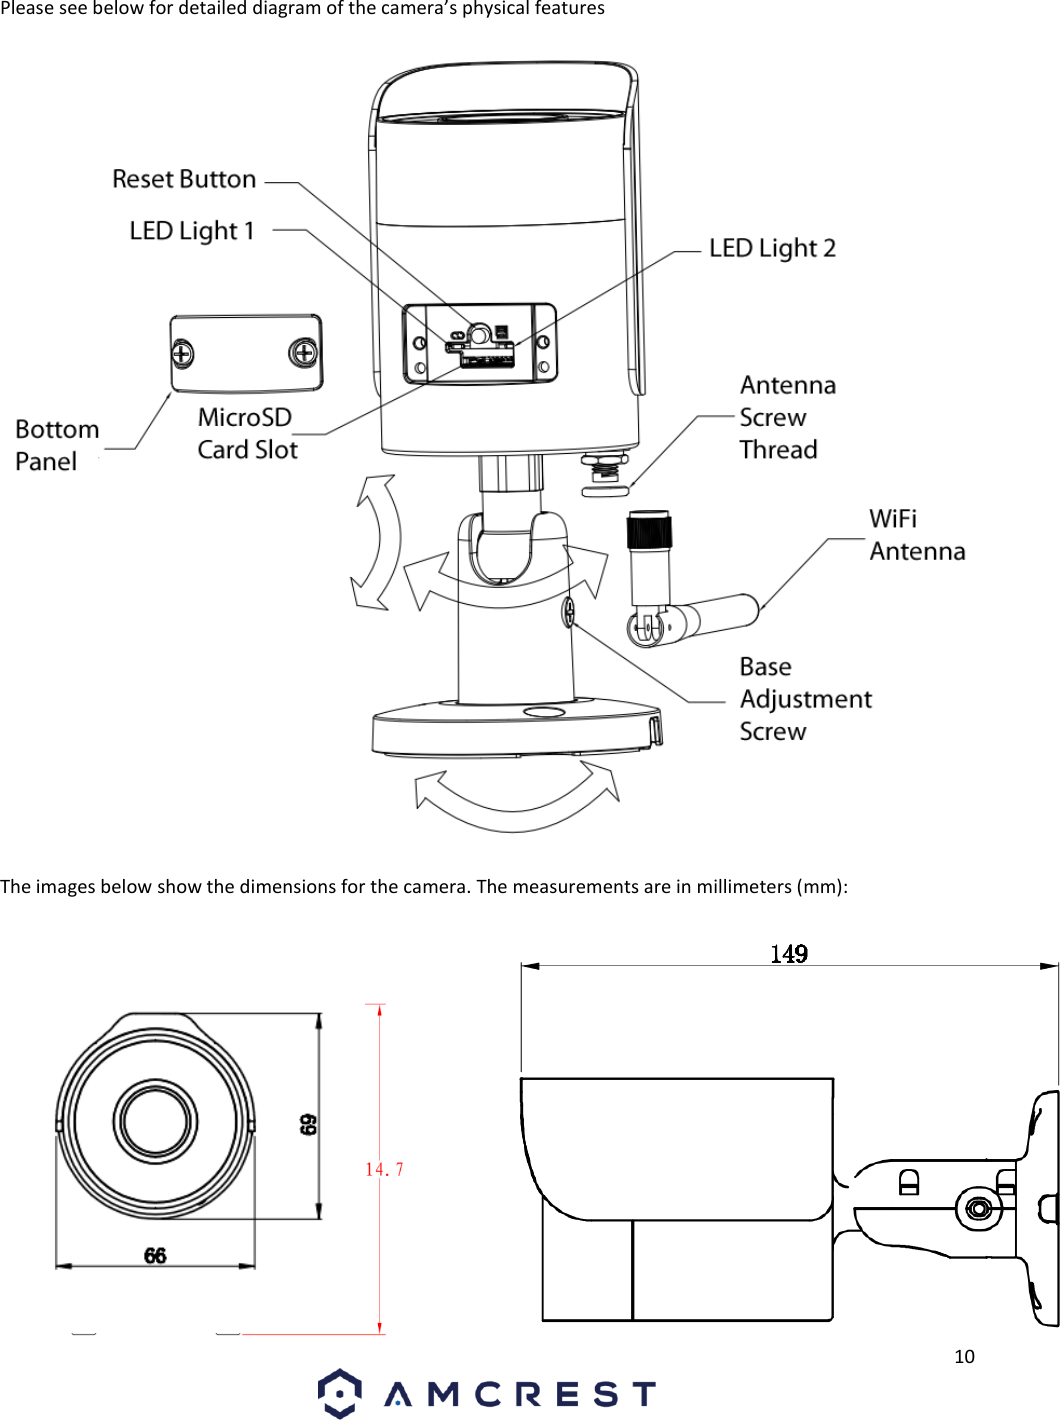 10 Please see below for detailed diagram of the camera’s physical features The images below show the dimensions for the camera. The measurements are in millimeters (mm): 